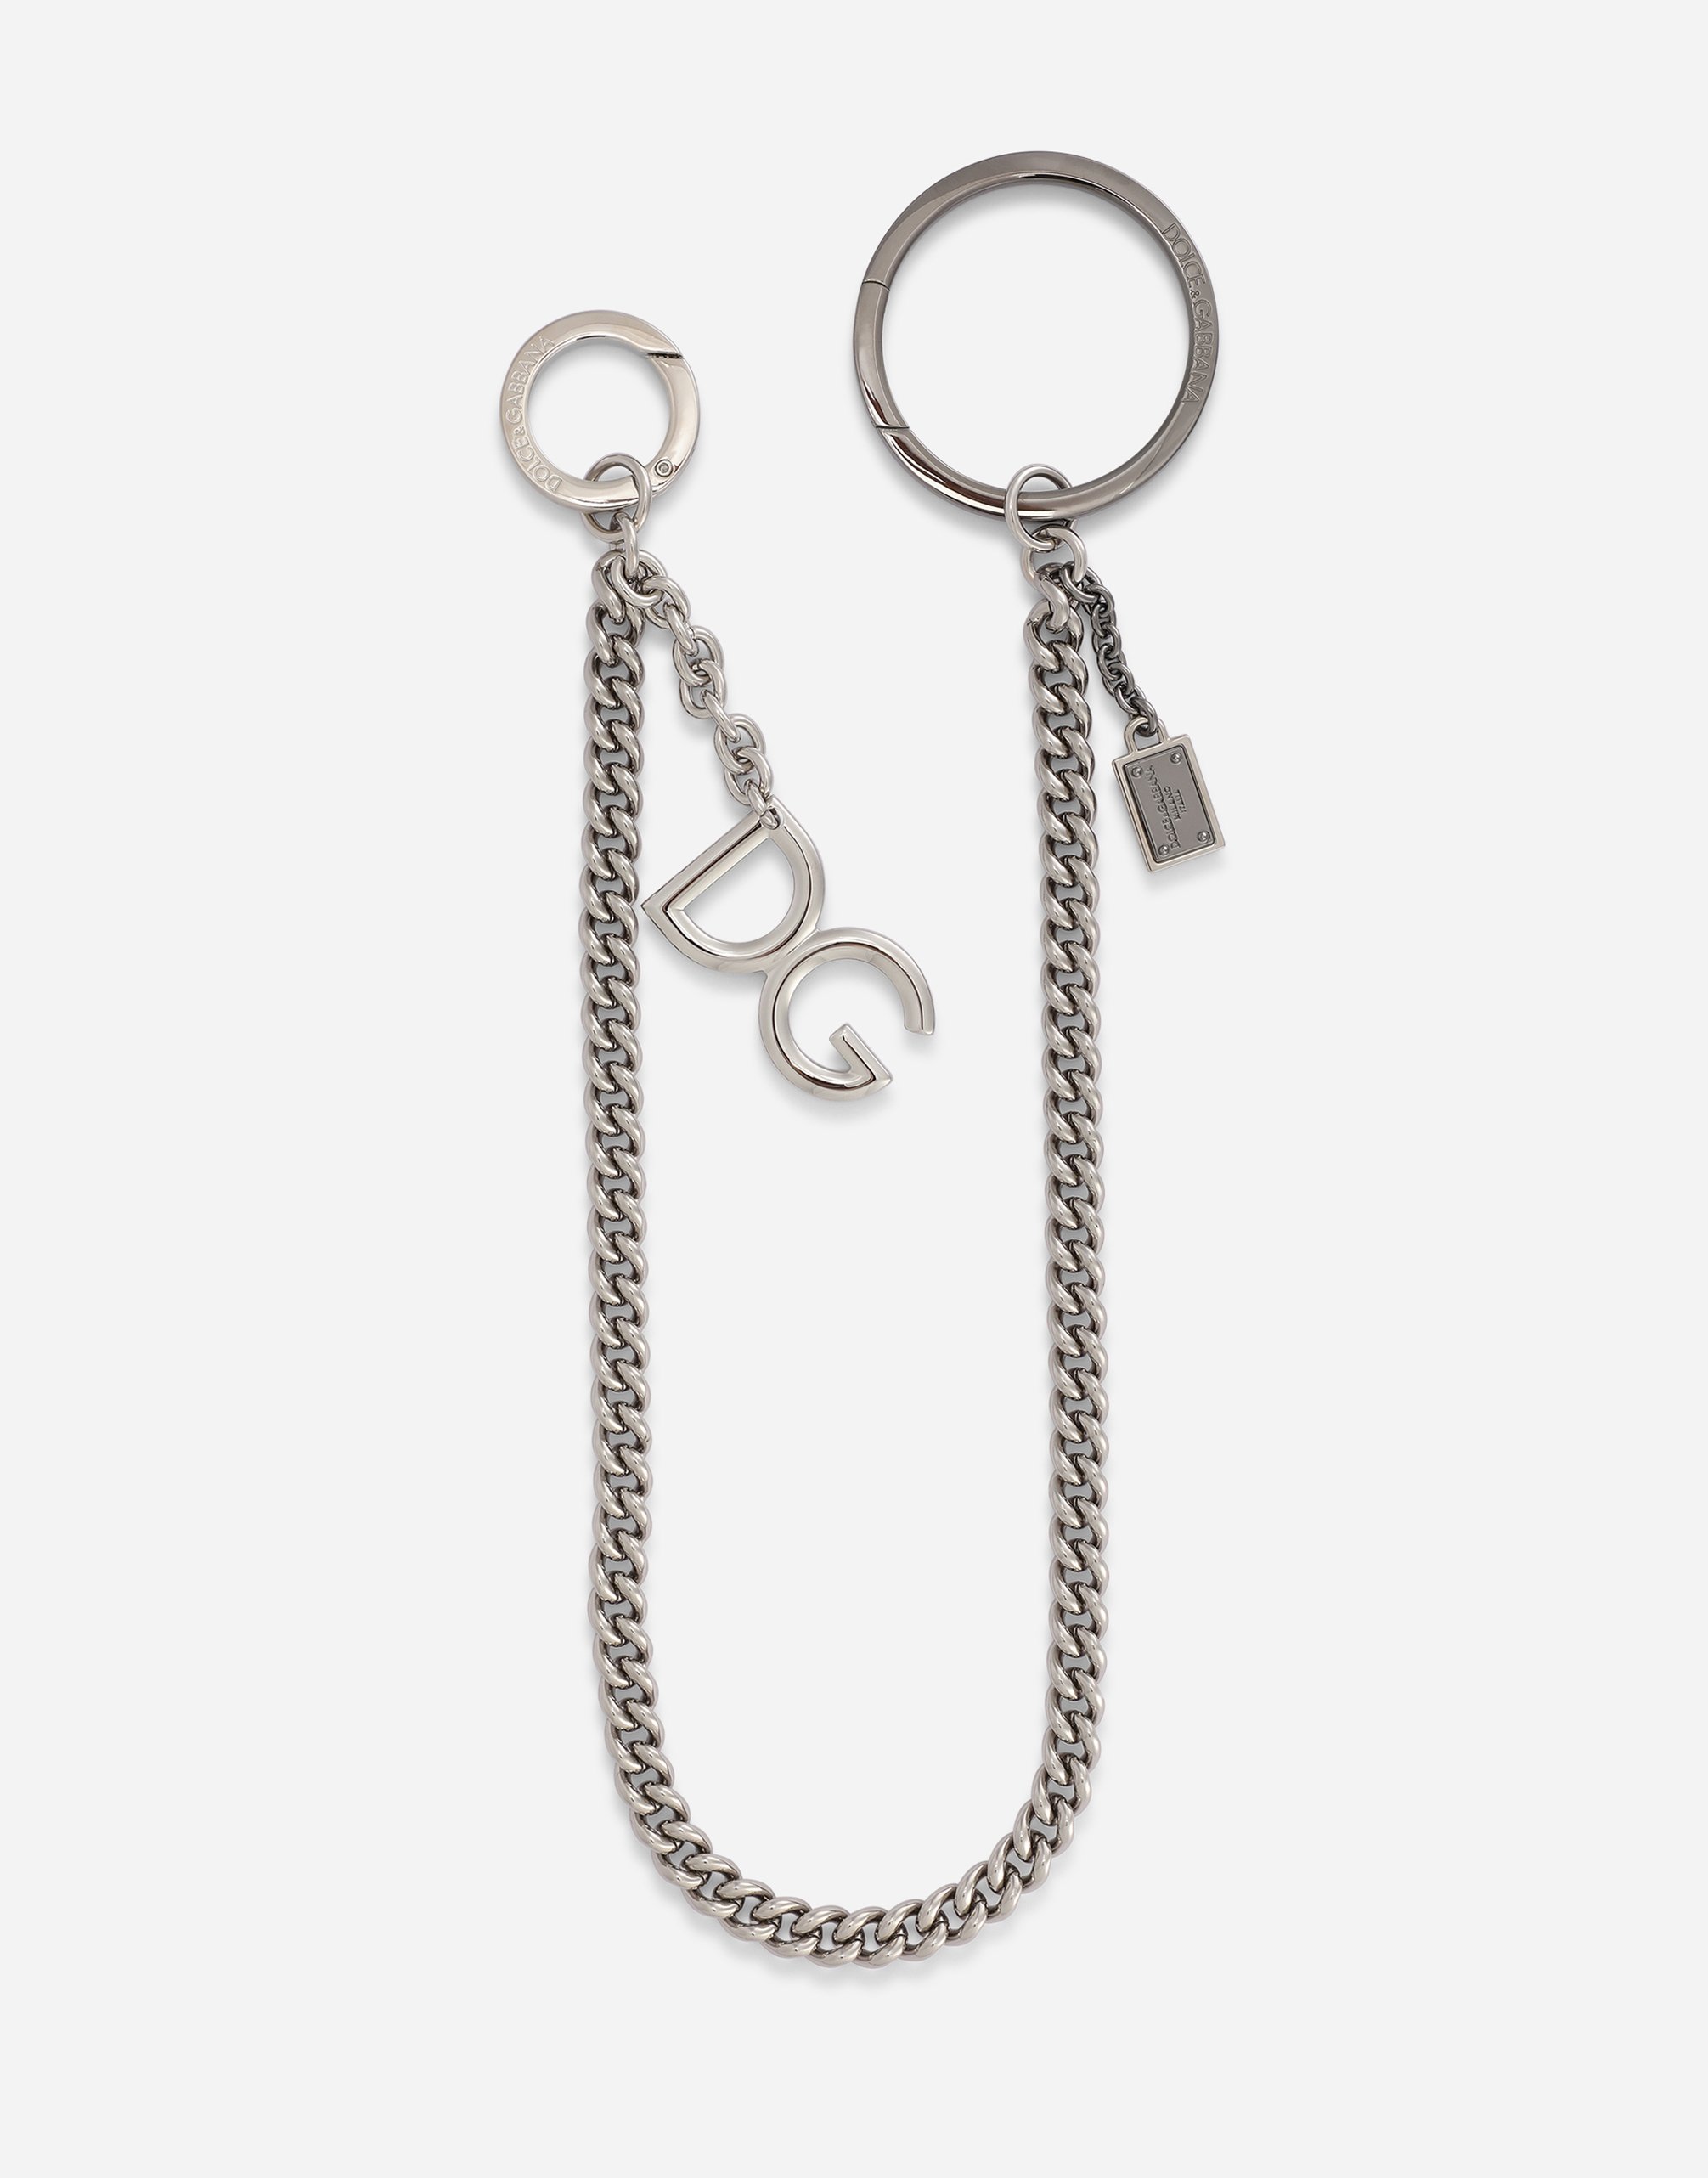 Chain keychain with DG logo in Silver